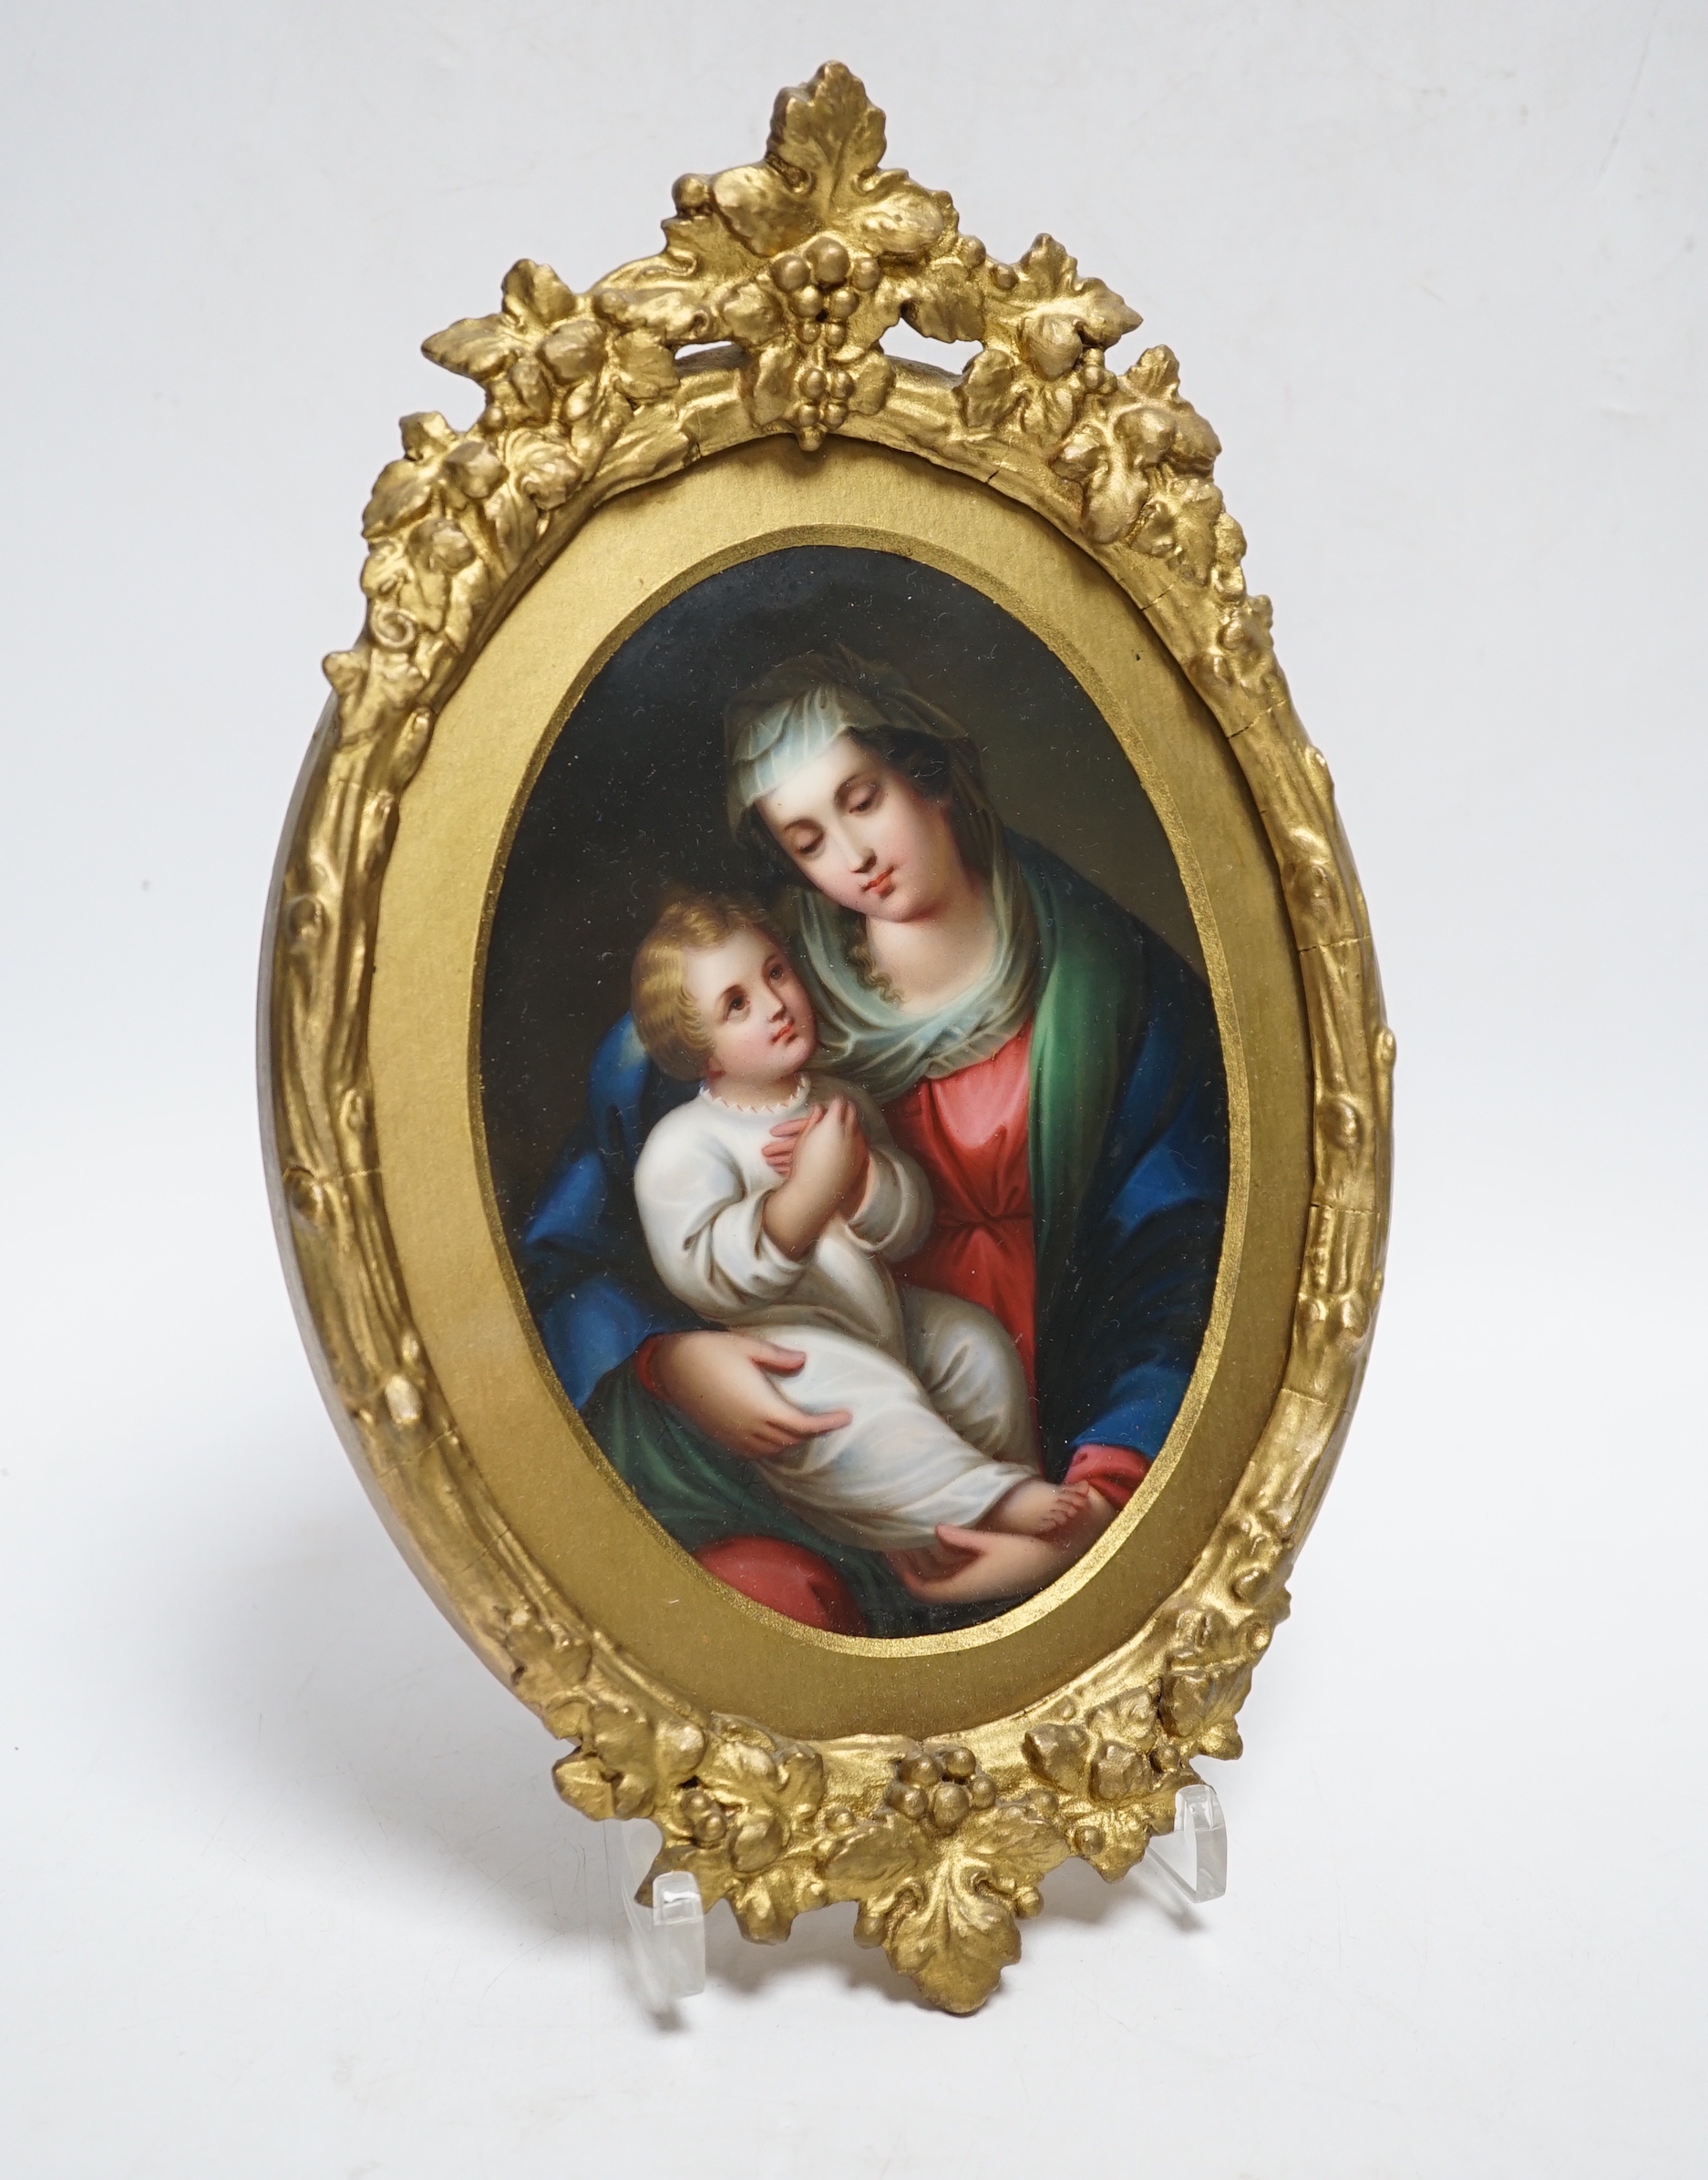 A 19th century Paris porcelain plaque depicting the Virgin Mother and child in a gilt painted frame, 16cm high